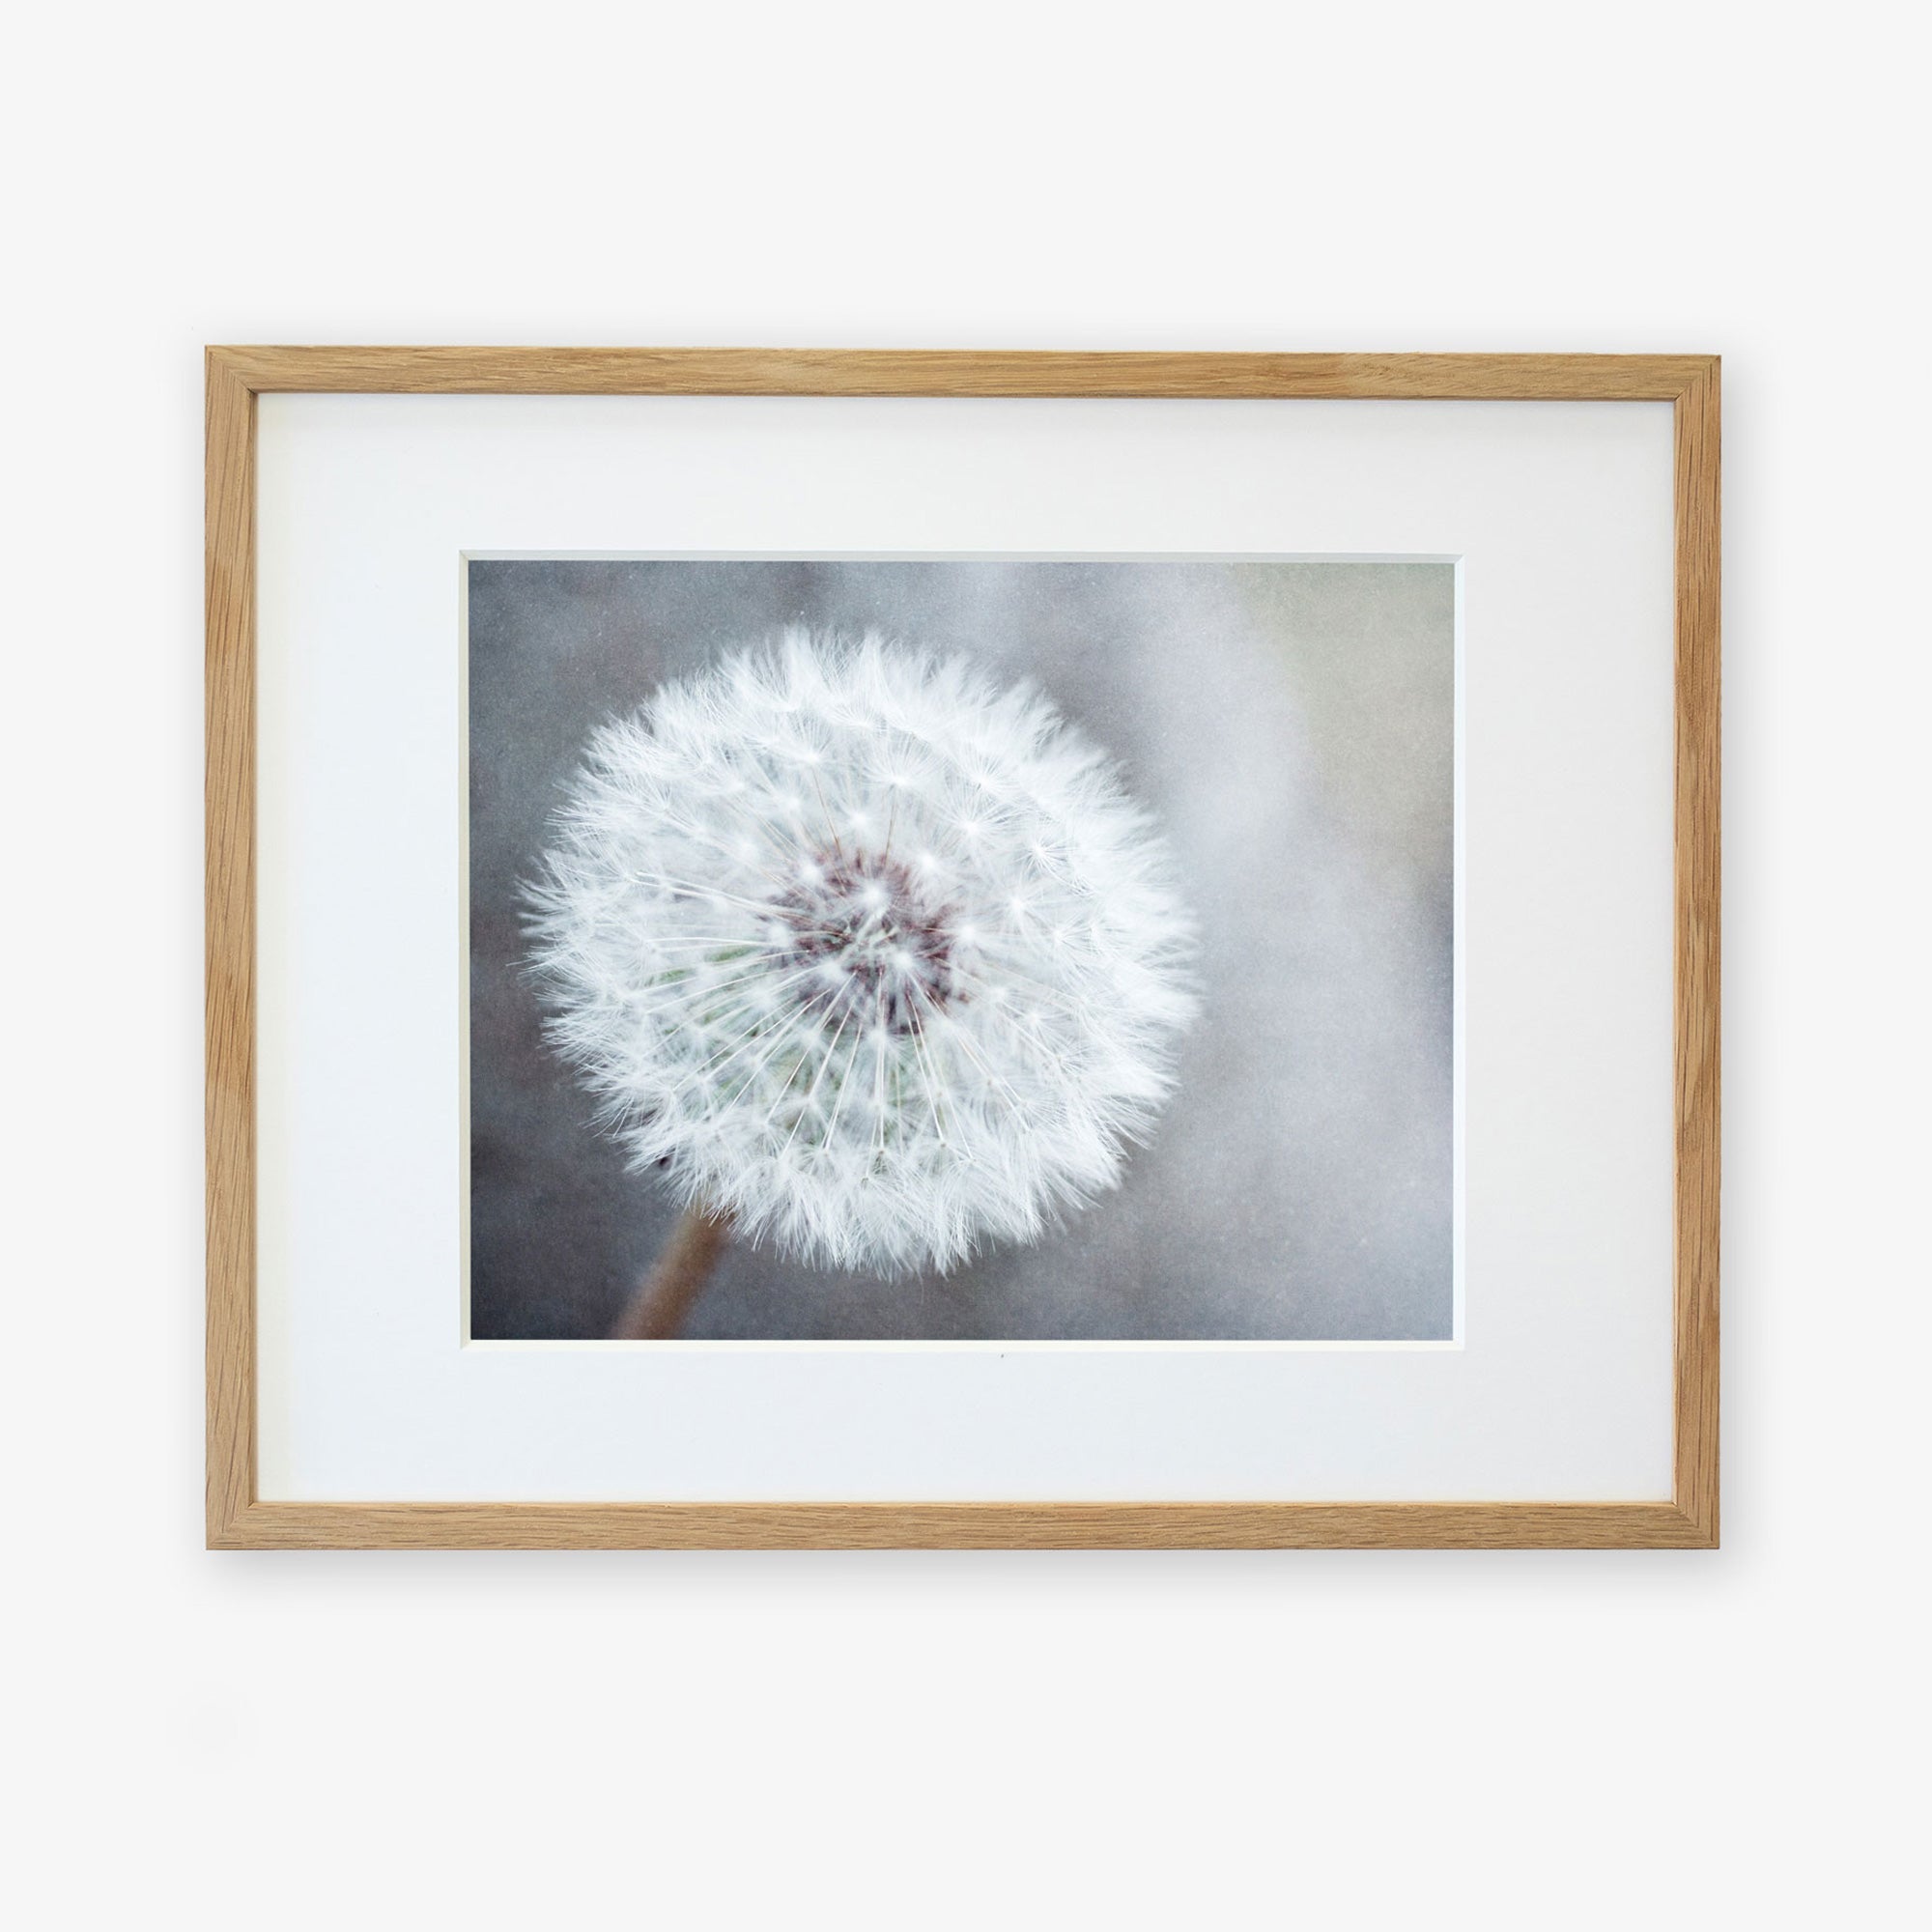 A framed Neutral Grey Floral Print, &#39;Dandelion King&#39; photograph of a dandelion seed head, with intricate details of its fluffy white seeds, printed on archival photographic paper, displayed against a soft focus gray background, encased in a light wooden frame by Offley Green.